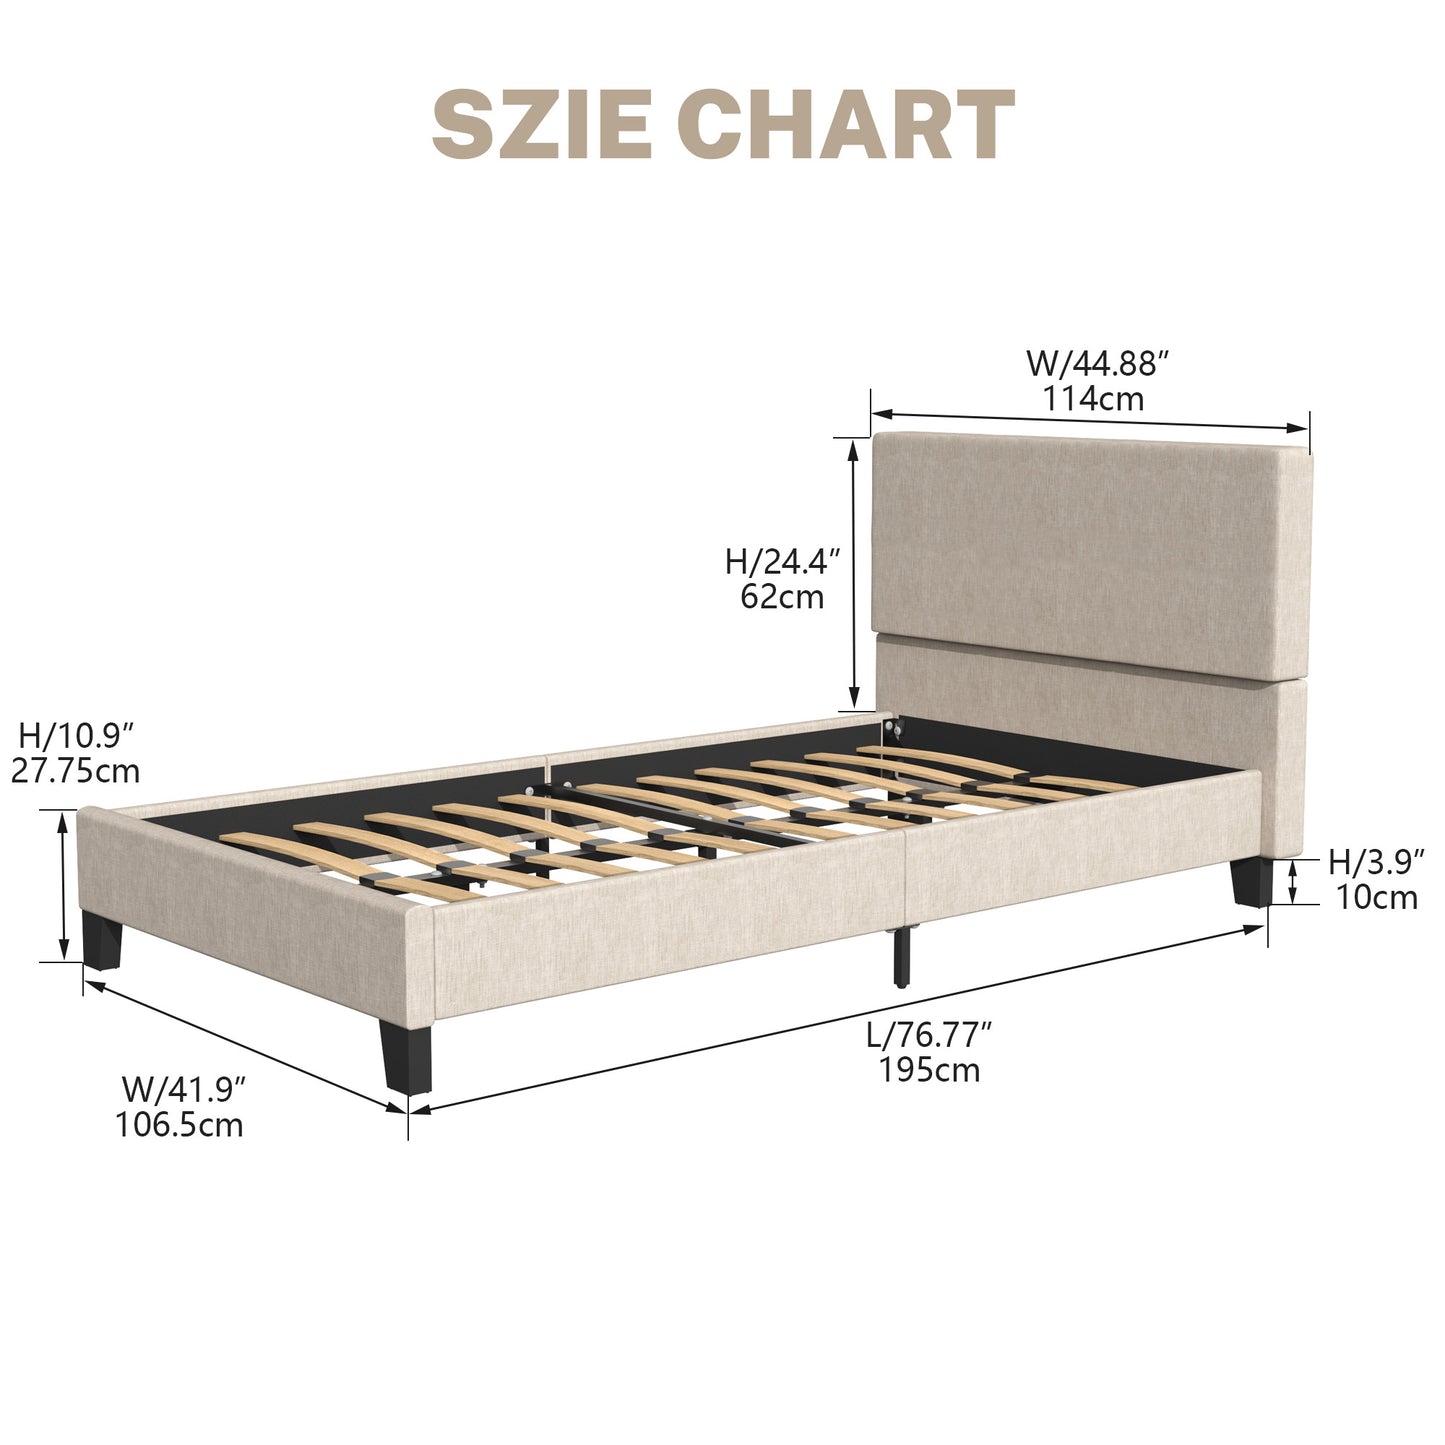 SYNGAR Beige Fabric Upholstered Platform Bed Frame Twin Size with Elegant Headboard, Metal Frame Bedroom Furniture with Strong Wooden Slat Support, No Box Spring Needed, Easy Assembly